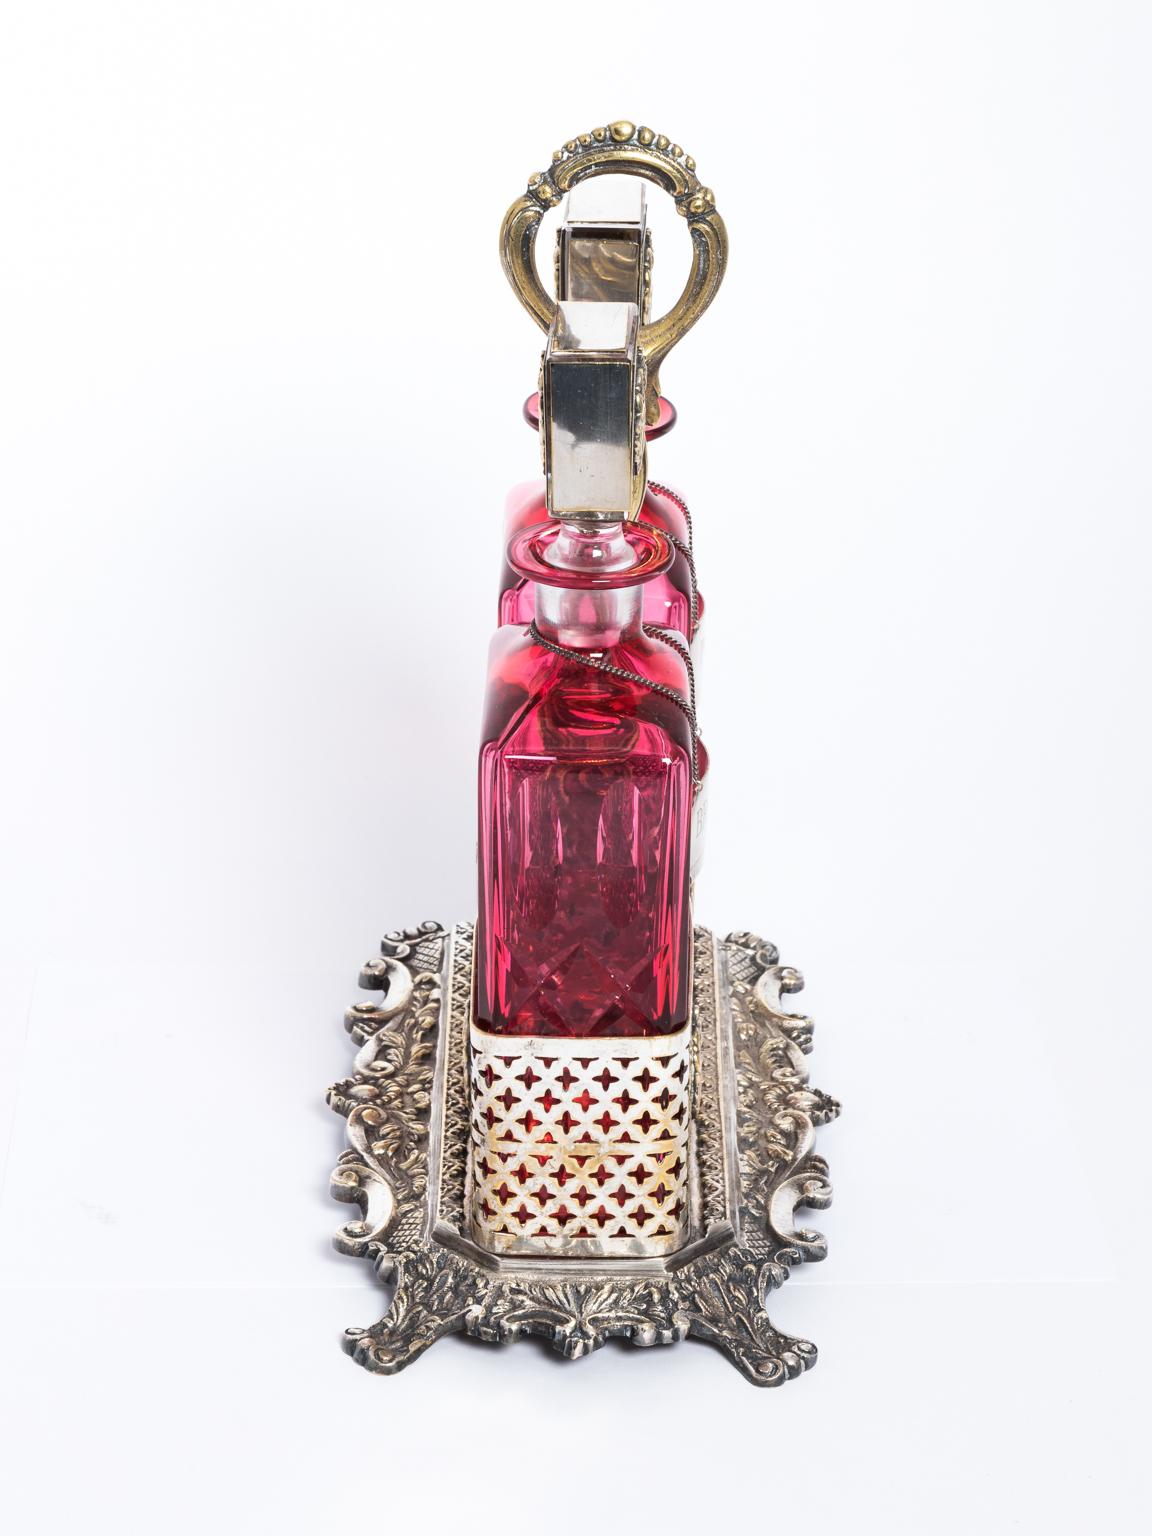 Cranberry/Cut Crystal Decanter Set English Ornate Plated Holder 9